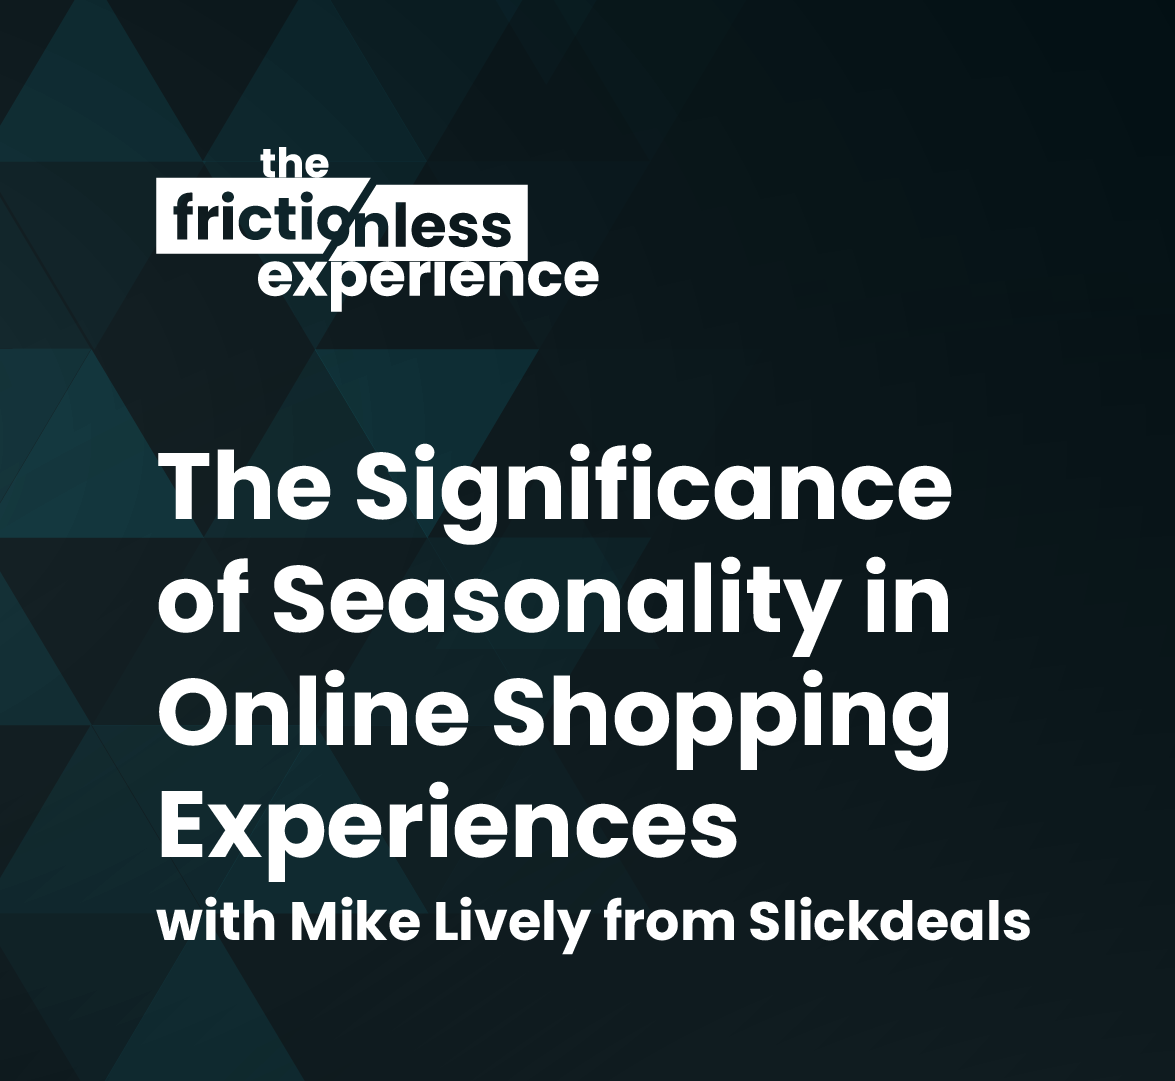 The Significance of Seasonality in Online Shopping Experiences with Mike Lively from Slickdeals